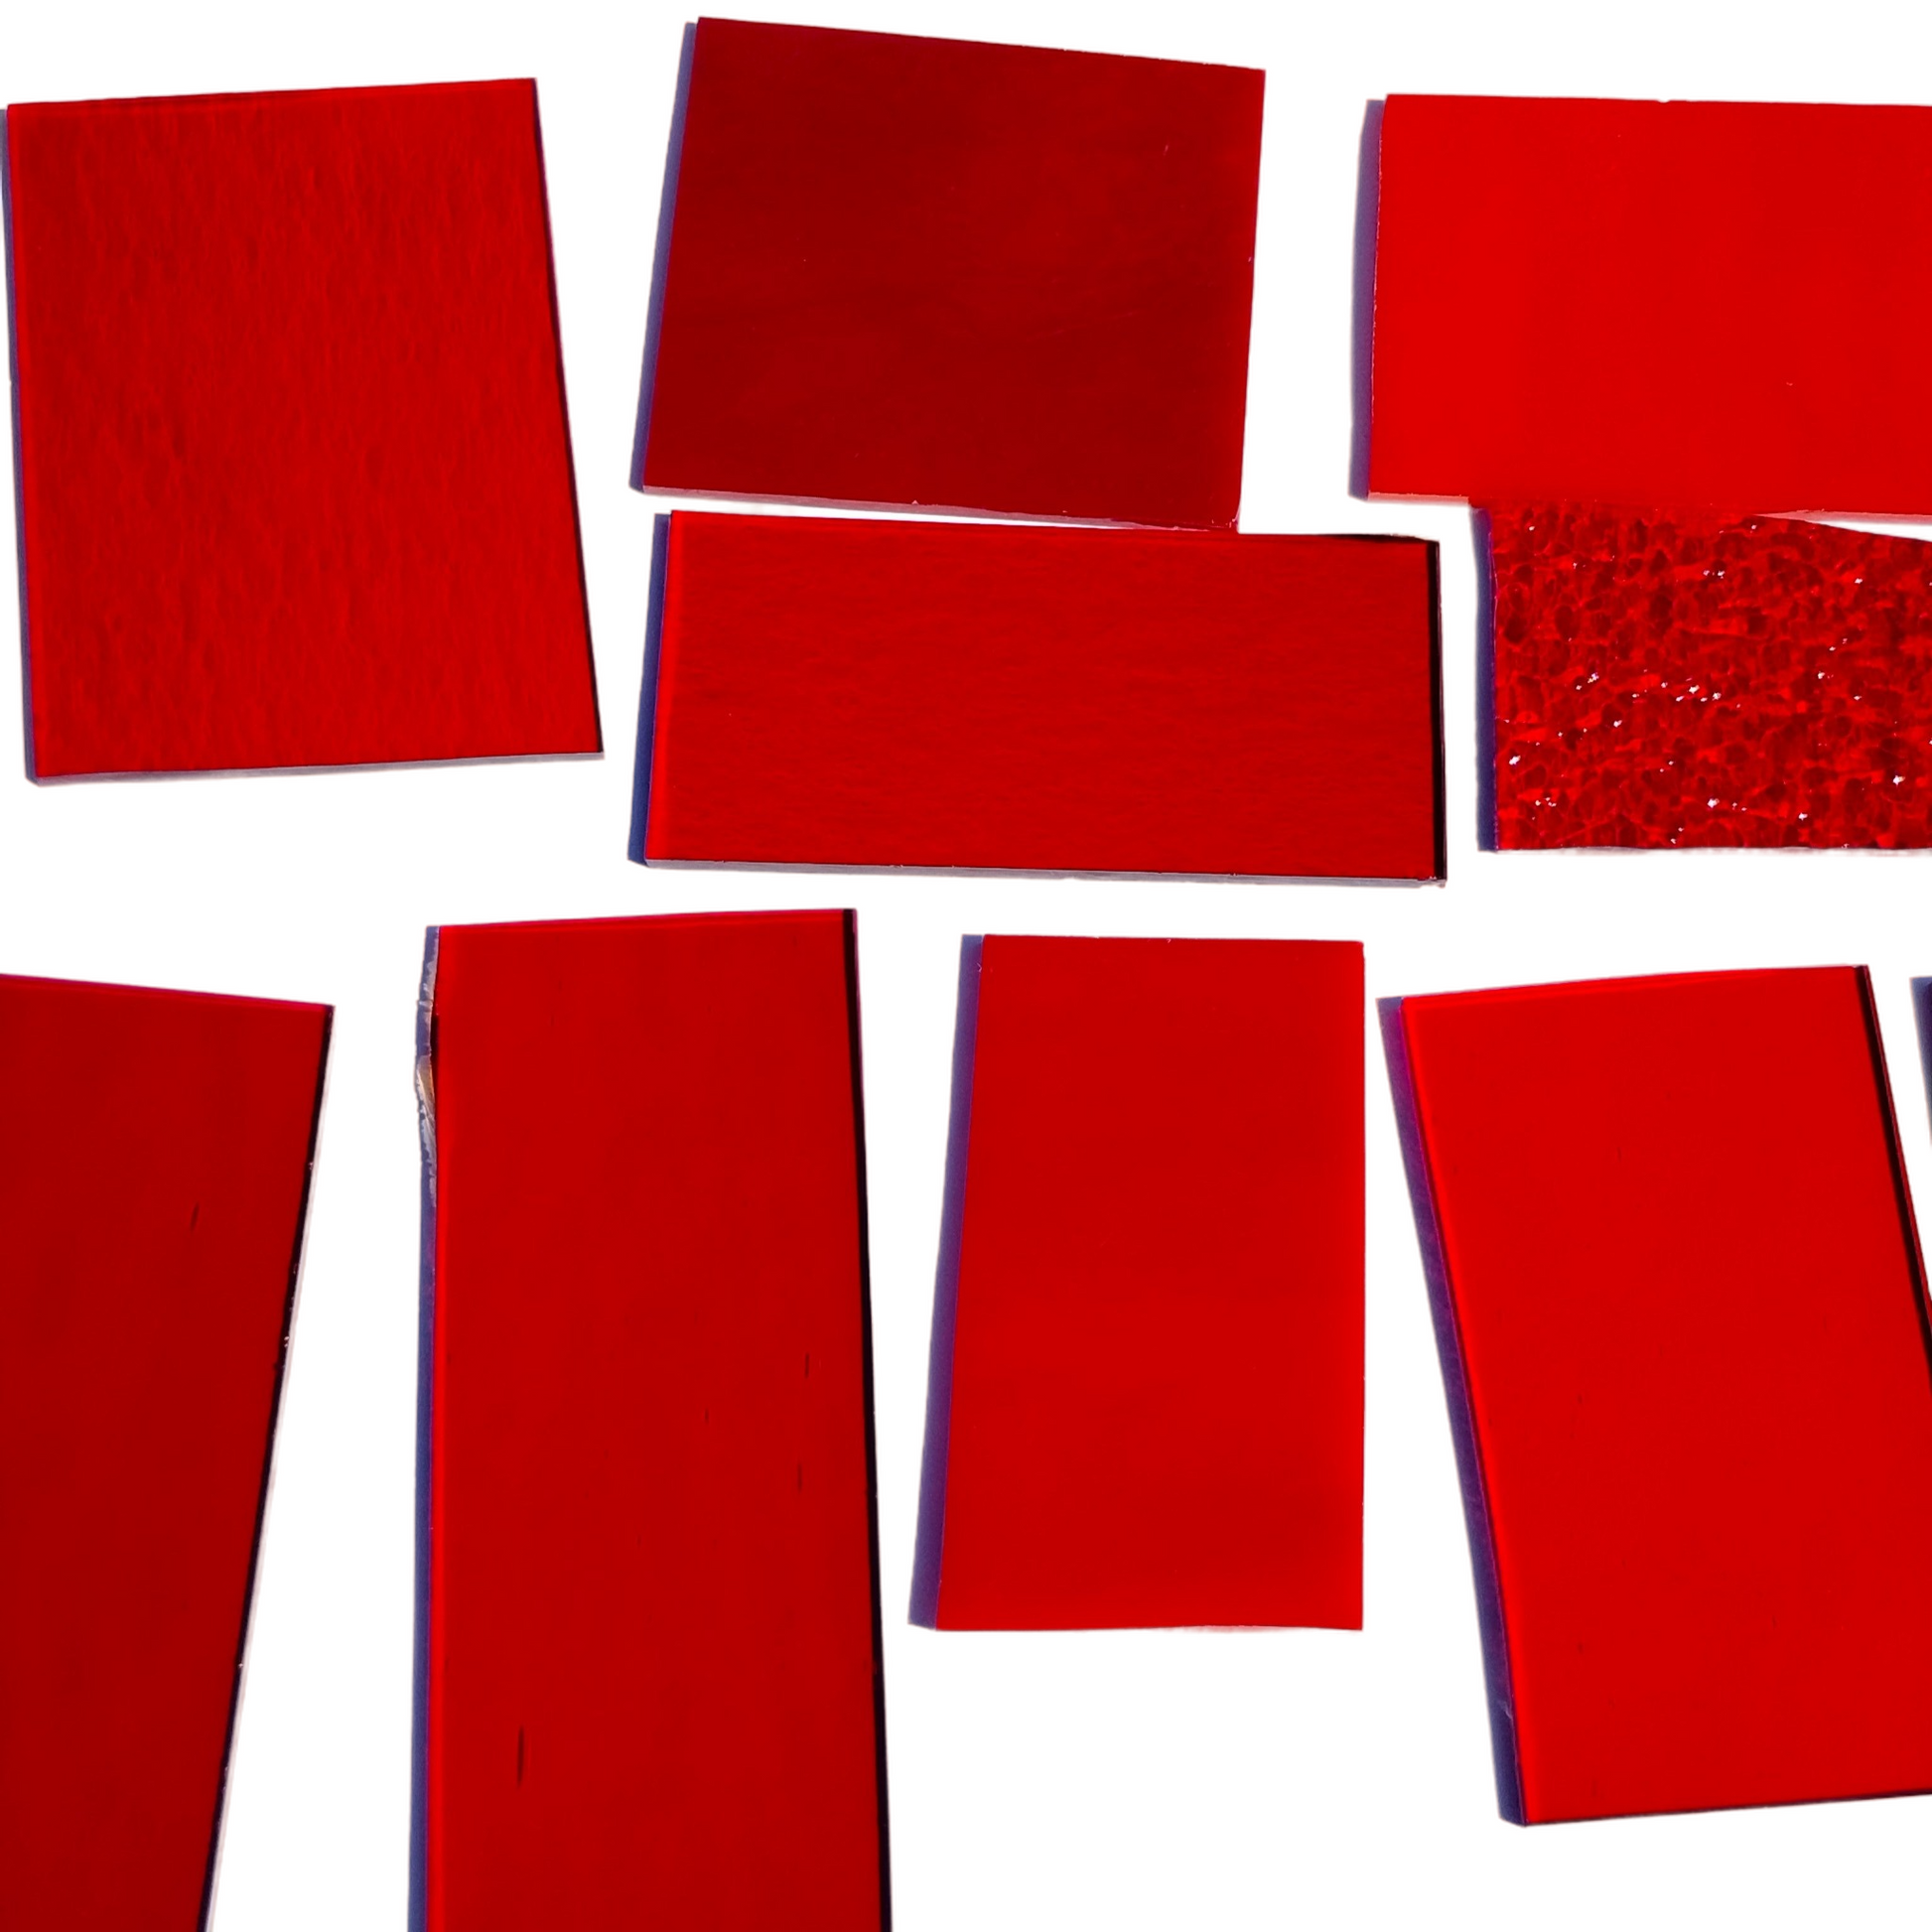 Assorted Red Stained Glass Scrap Pieces, Curated 1 lb Package. Hand picked, sorted by color, clean. Red art glass assortment perfect for stained glass and mosaic art. Ships carefully in 1 business day. Free shipping available.